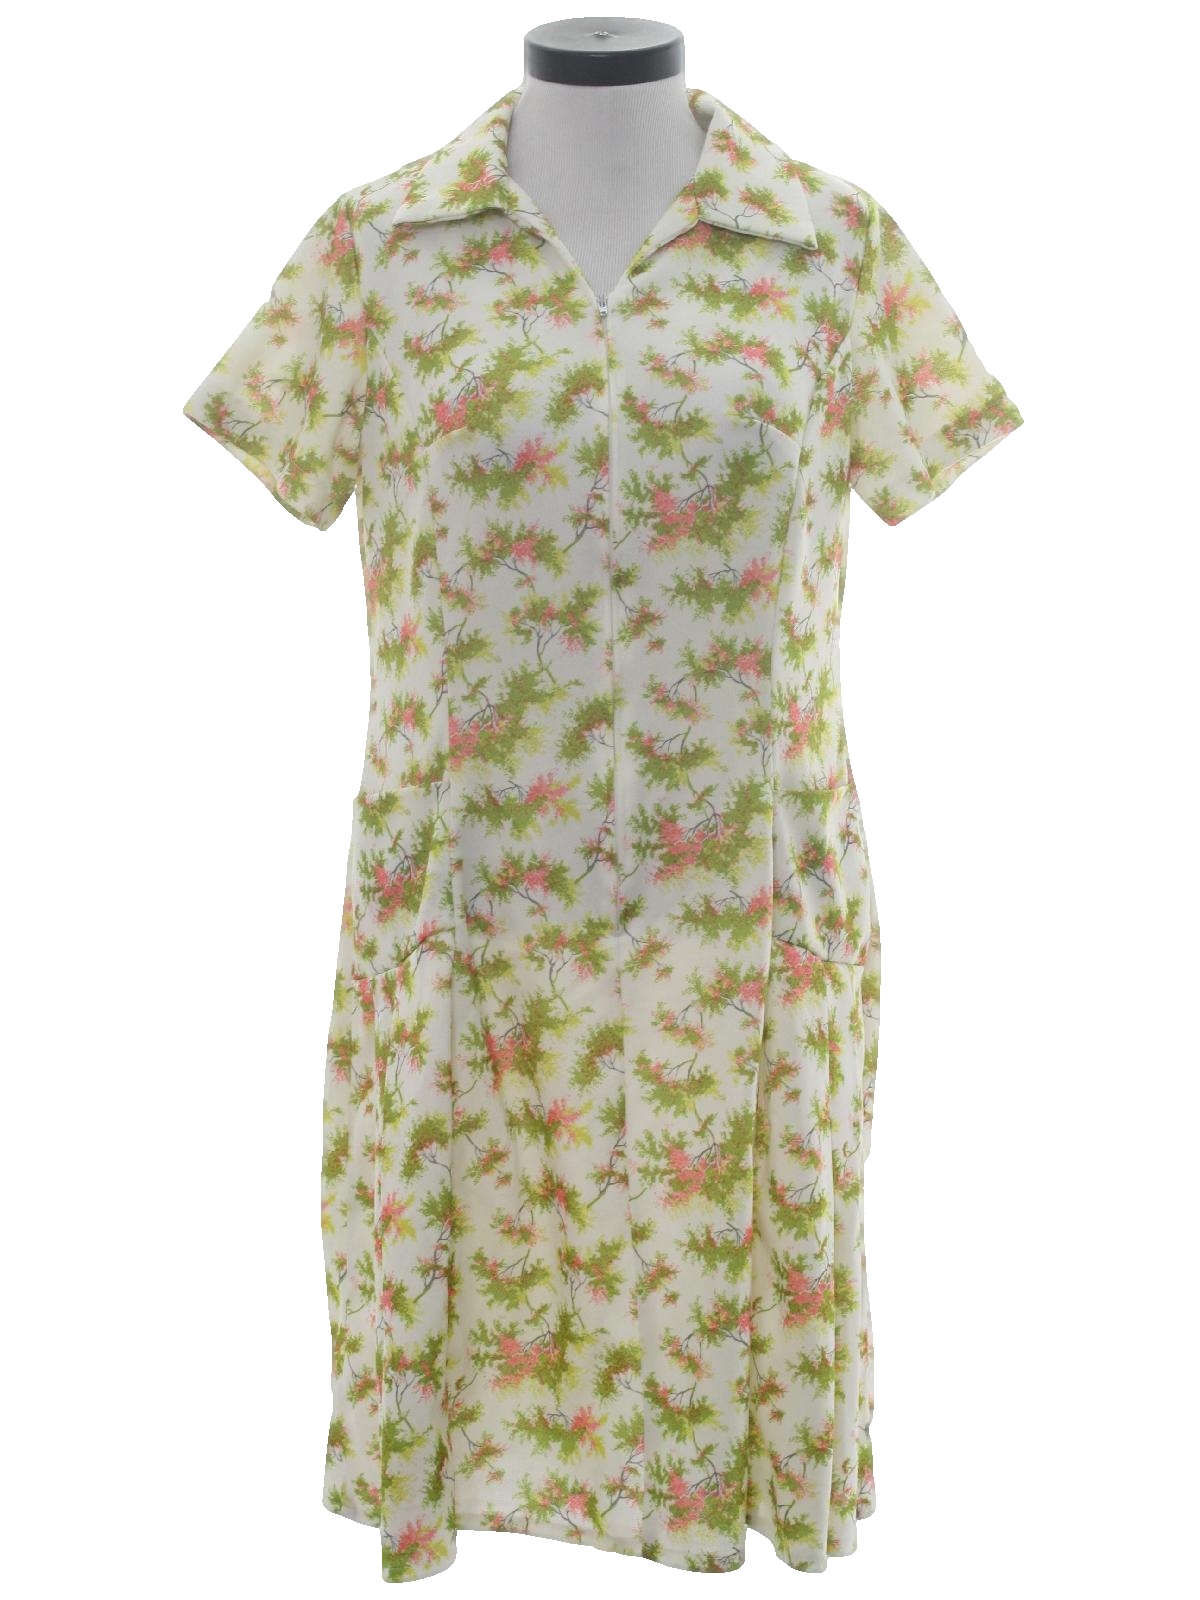 Retro 1970s Dress: 70s -home sewn- Womens white background polyester ...